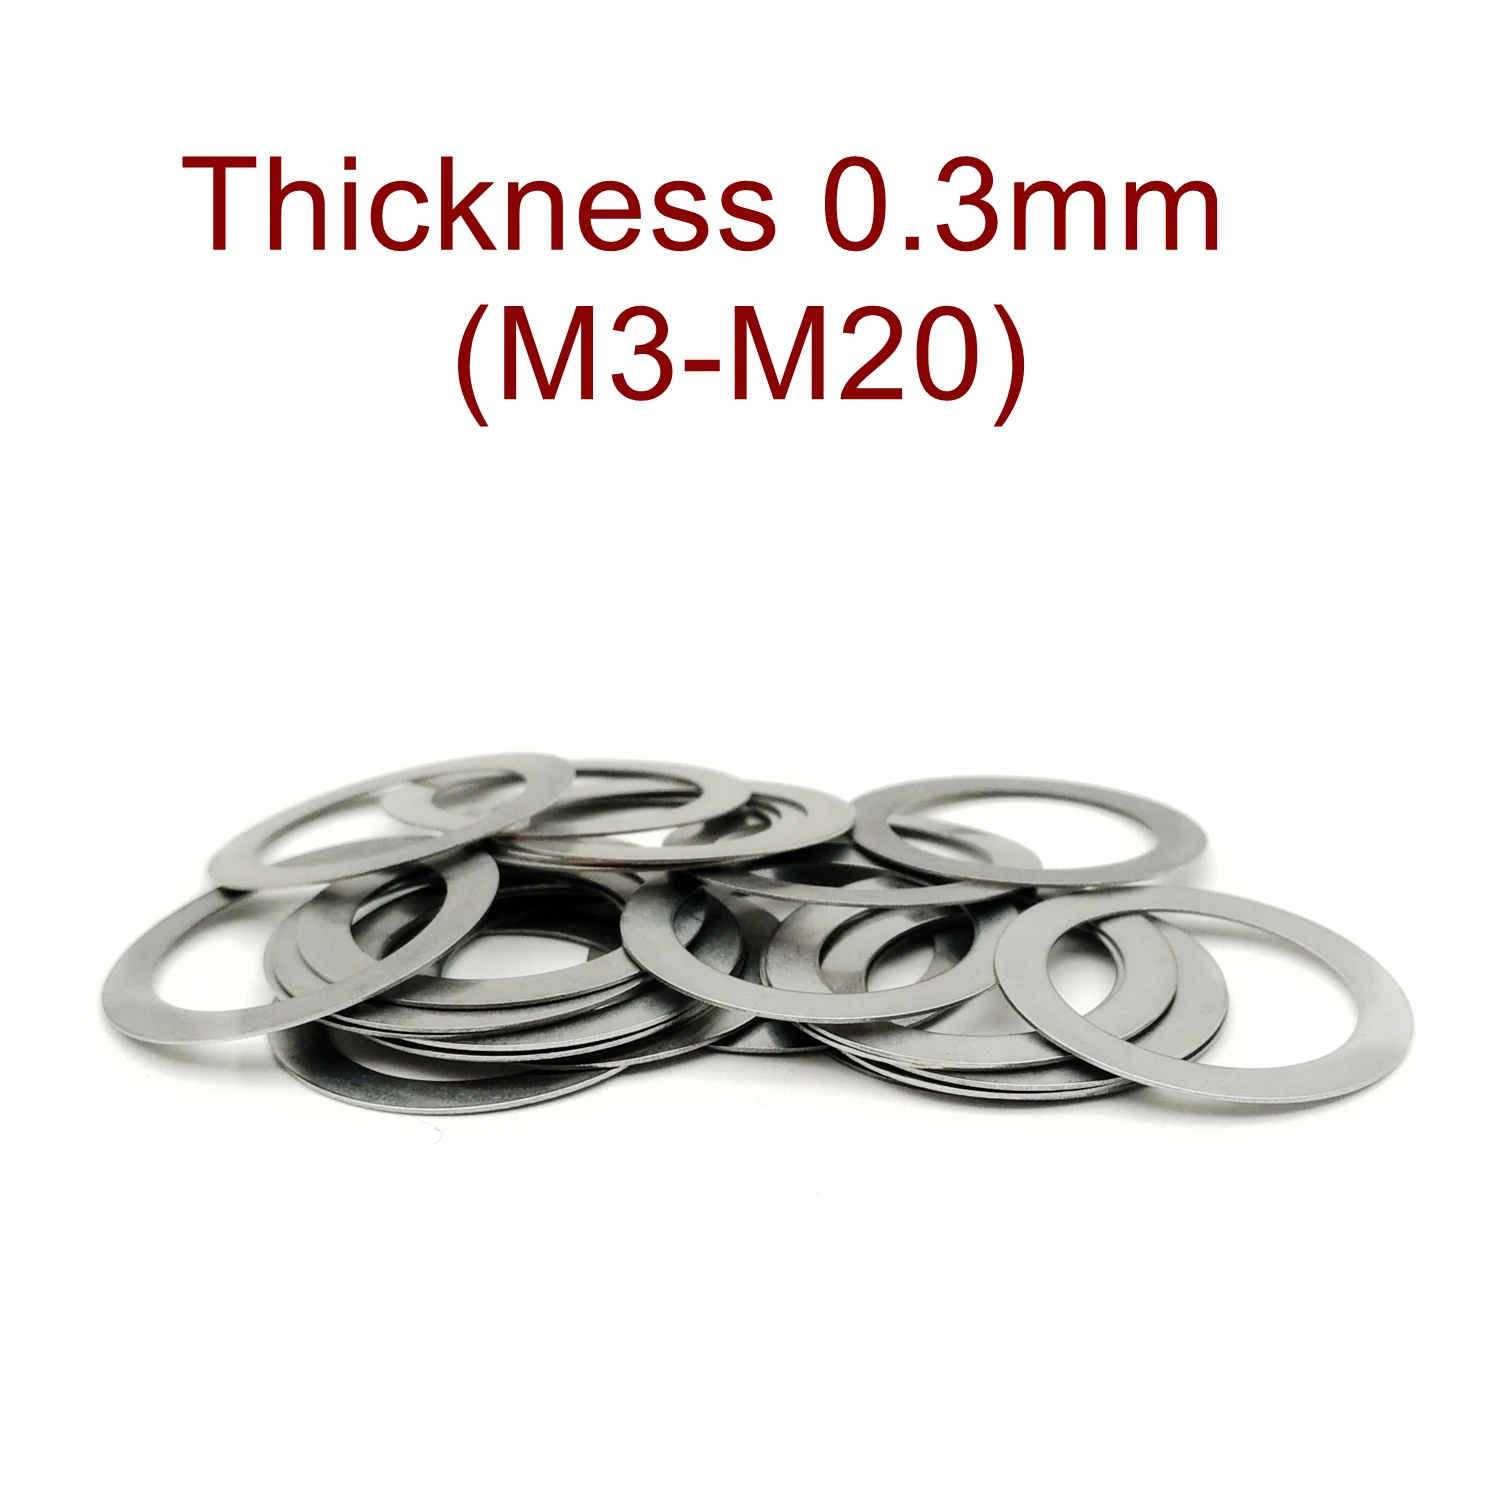 Thickness 0.3mm Stainless steel Flat Washer Ultra thin gasket High precision Adjusting gasket M3-M25 Thin shim SUS304